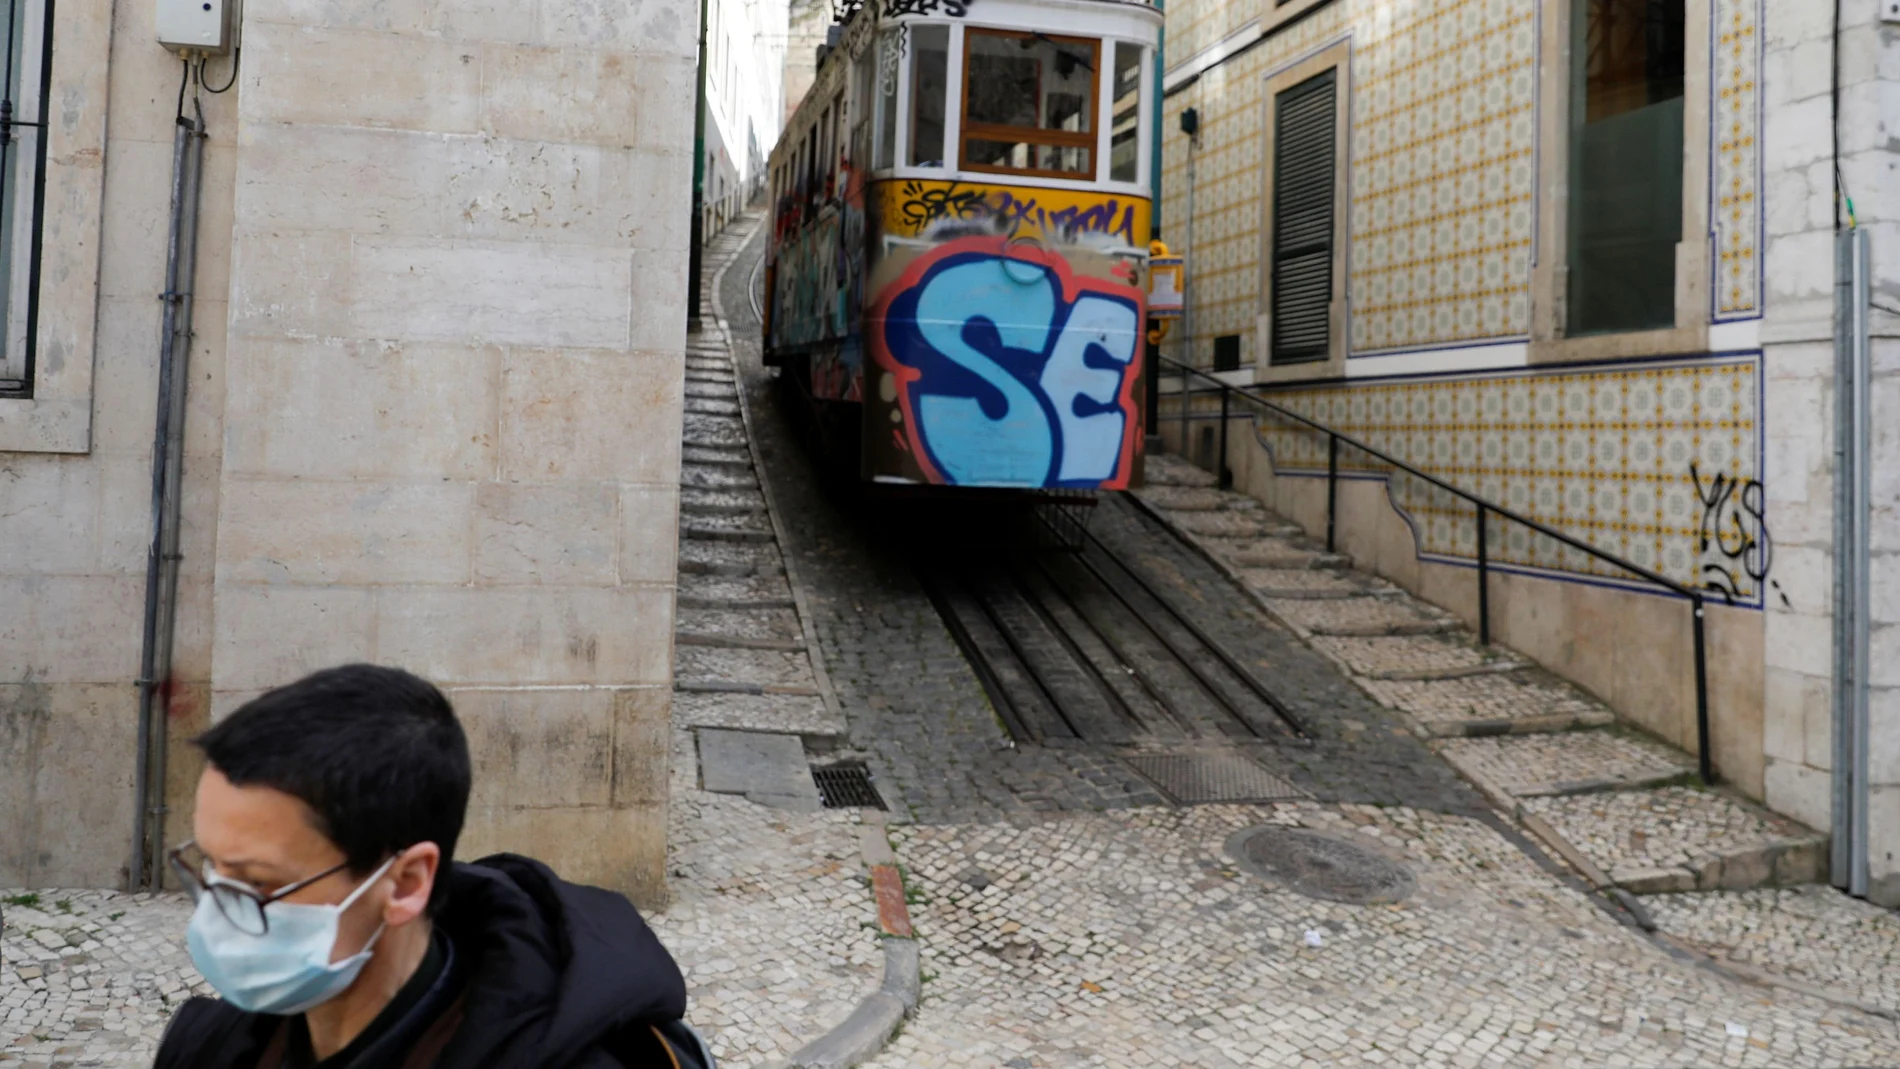 A woman is pictured wearing a mask as she walks next to a tram in downtown Lisbon